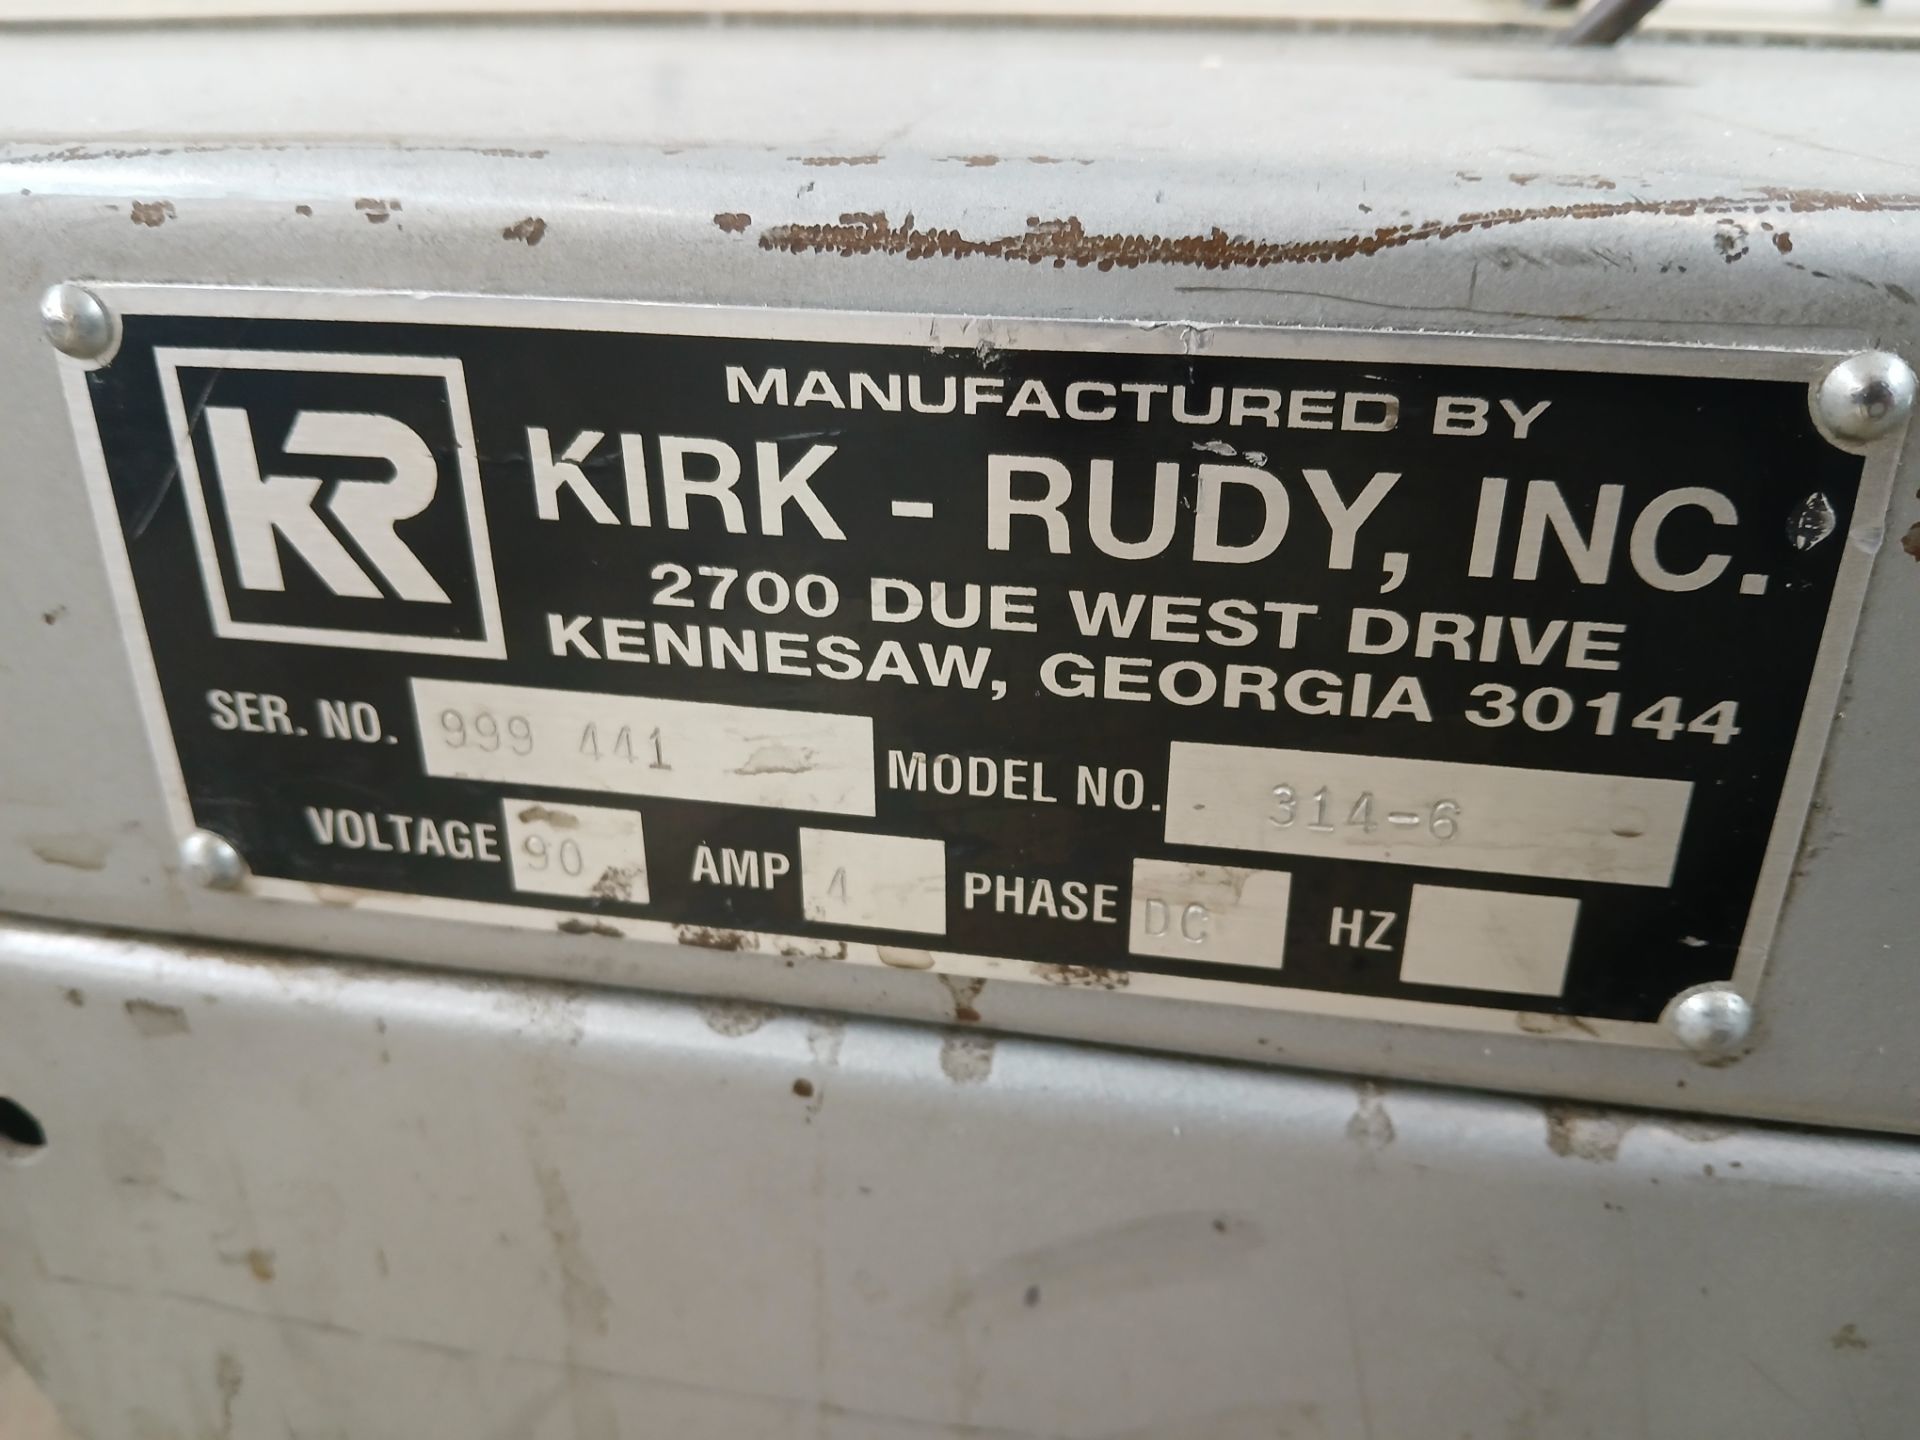 Kirk-Rudy 215V throughfeed jetmail system, Serial Number 9995176 with Dell Dimension 9150 PC control - Image 9 of 9